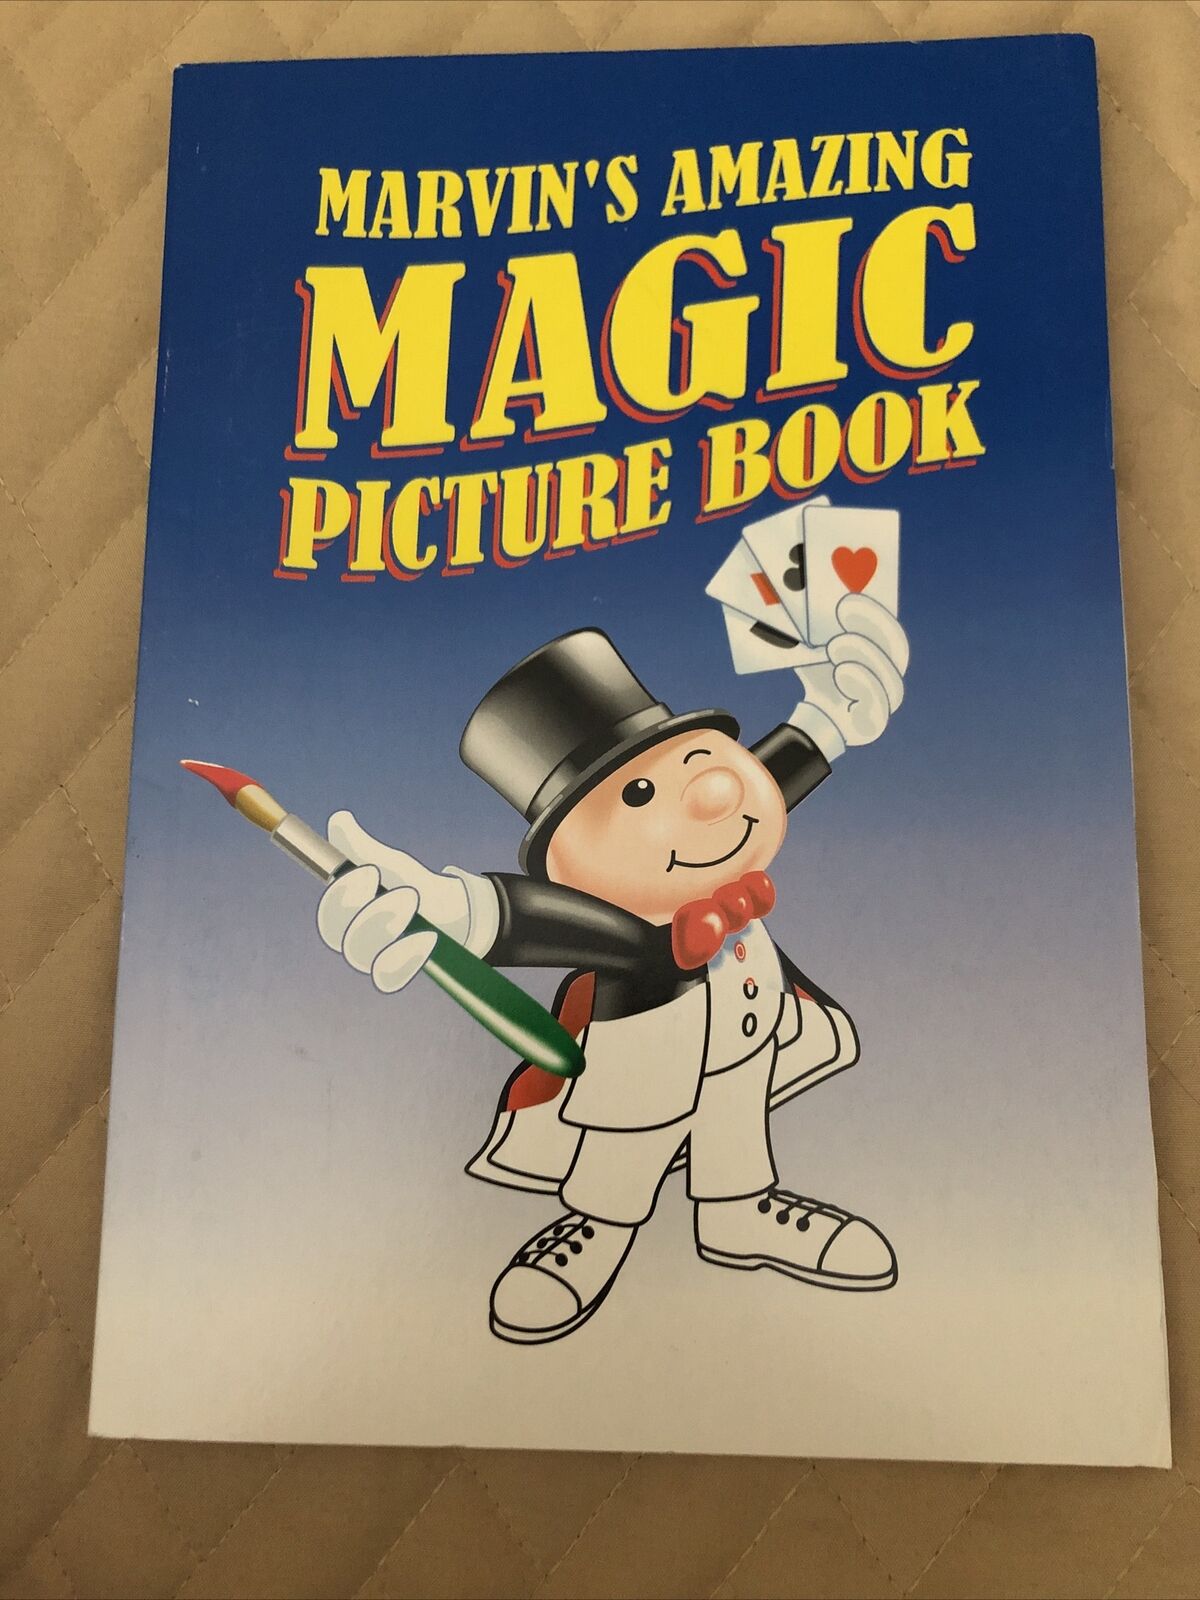 Marvin's Amazing Magic Picture Book - Rare and No Longer Made. LN